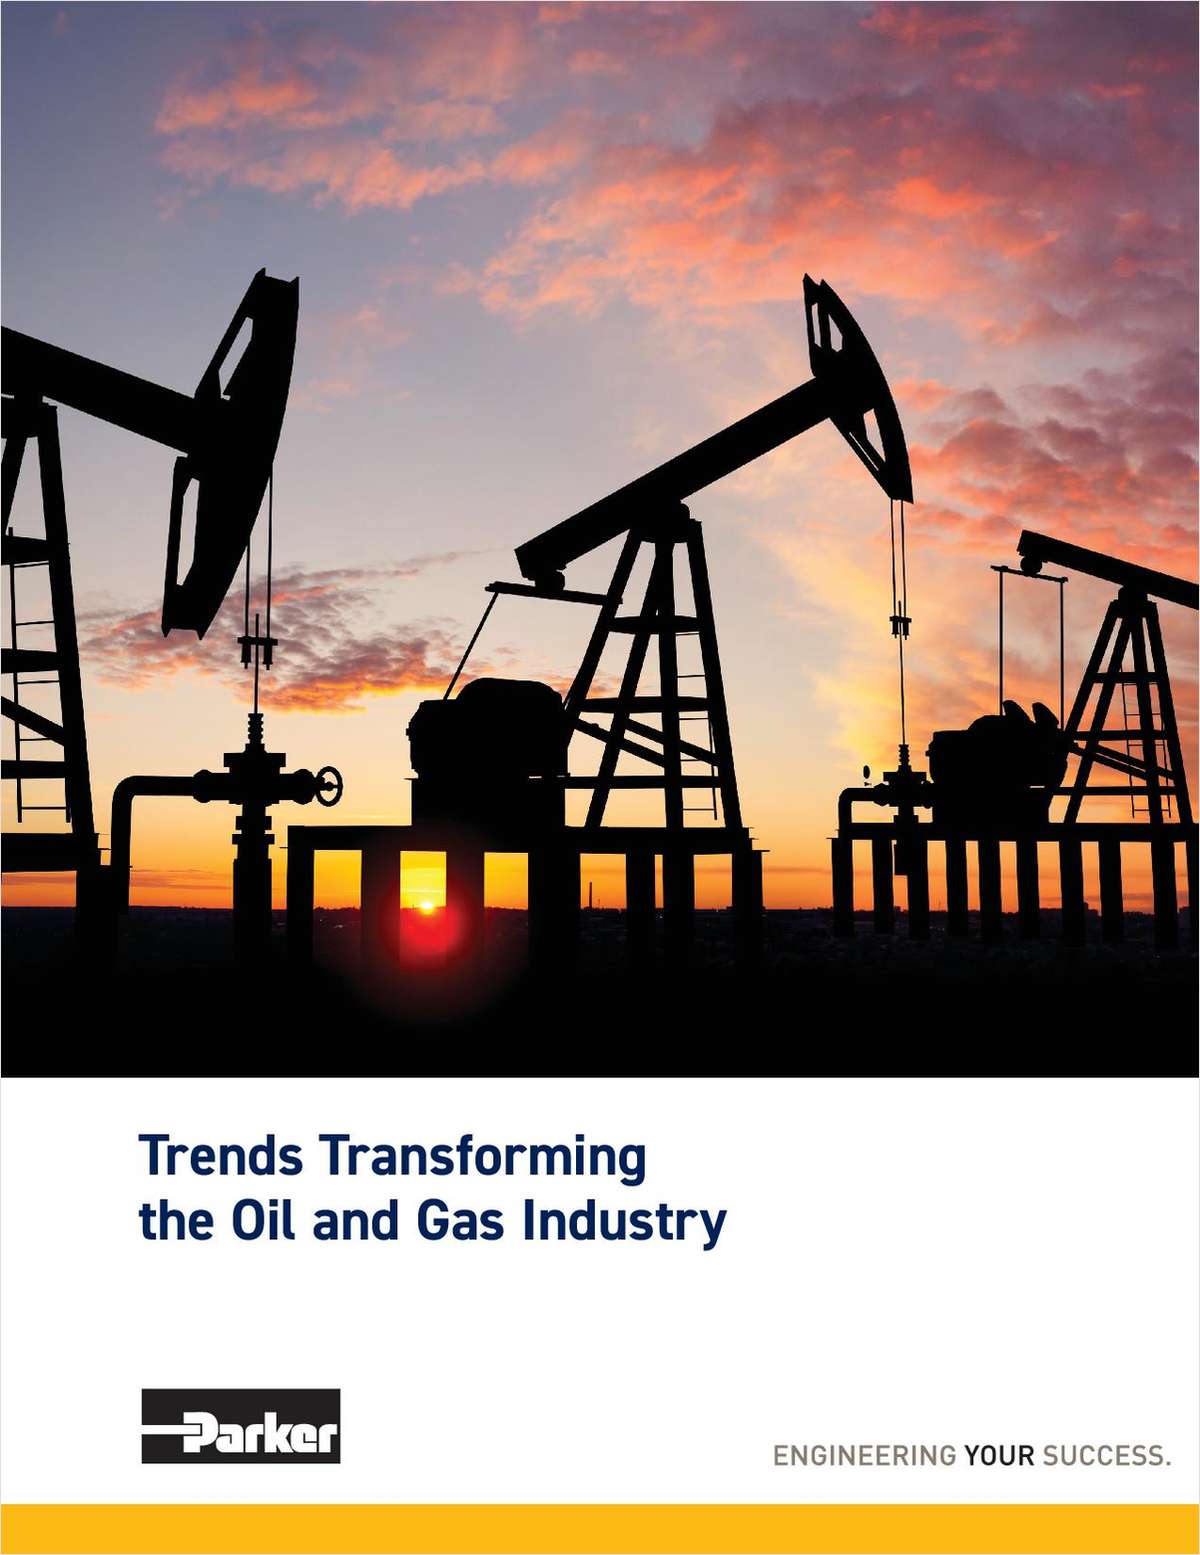 Trends Transforming the Oil & Gas Industry